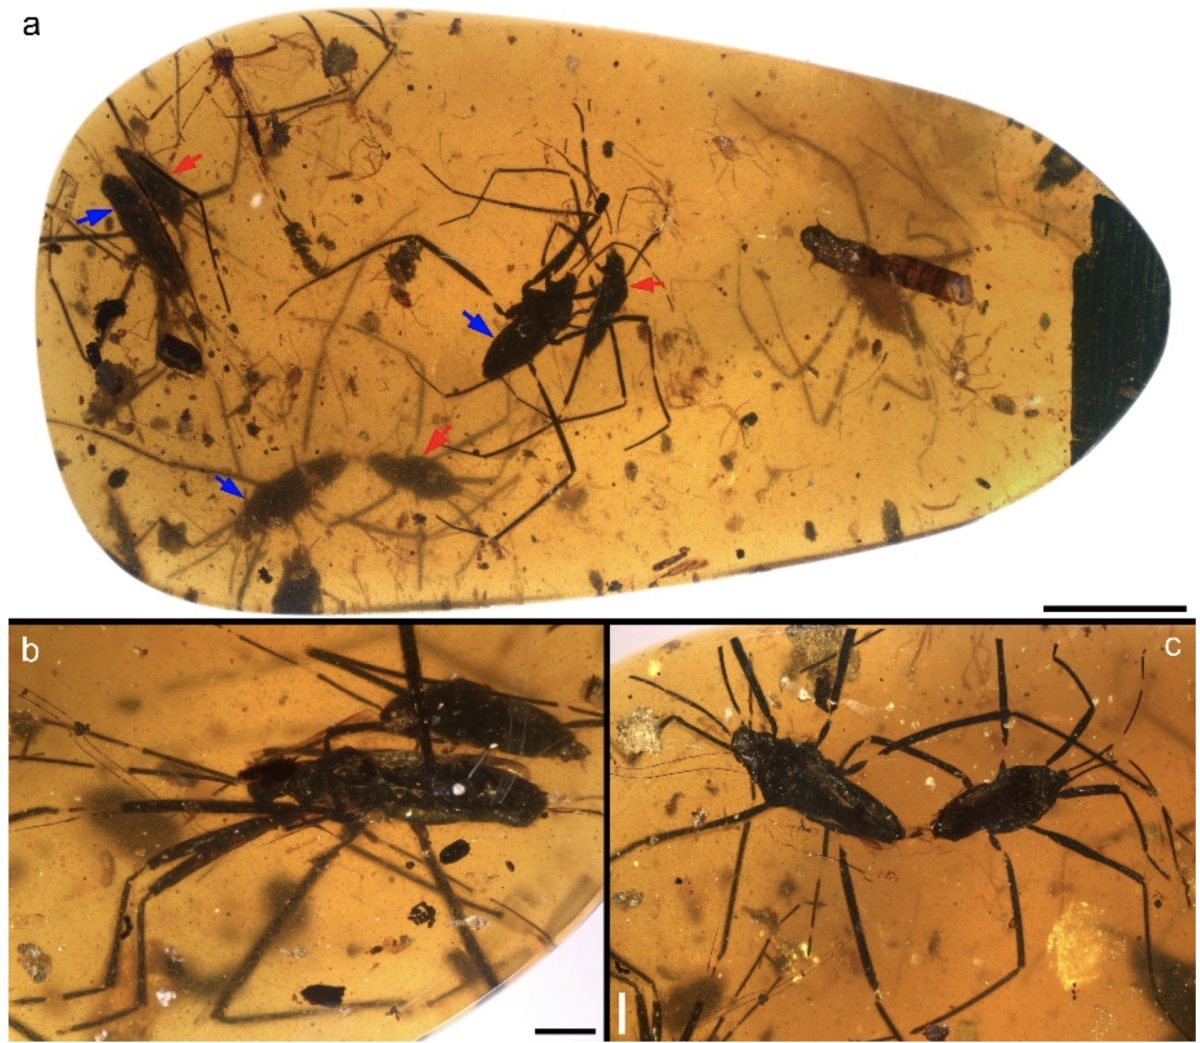 Chinese researchers reveal mating dynamics of ancient insects in amber